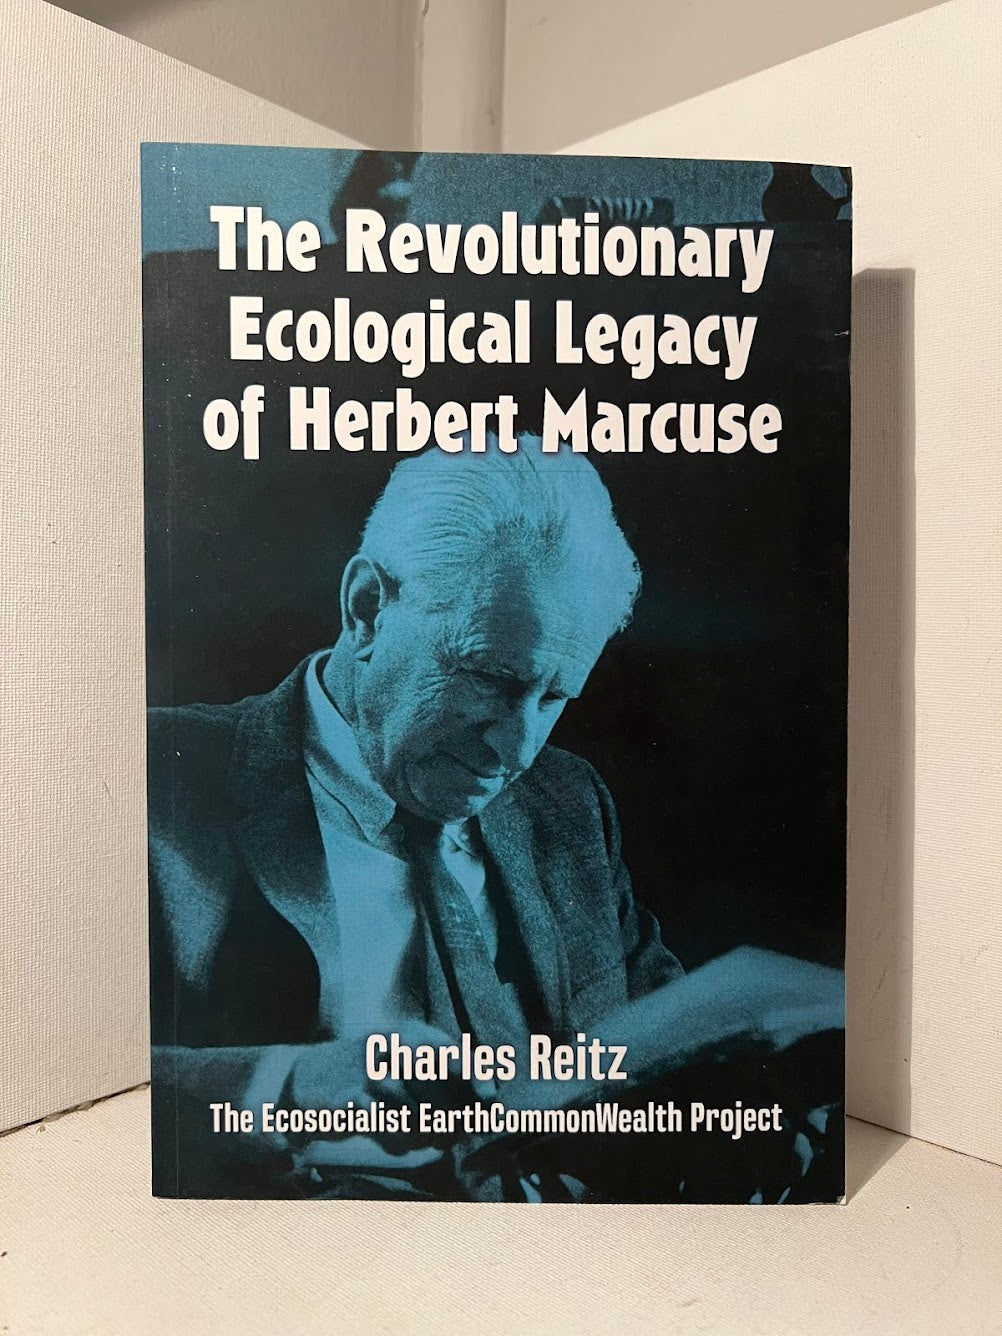 The Revolutionary Ecological Legacy of Herbert Marcuse by Charles Reitz